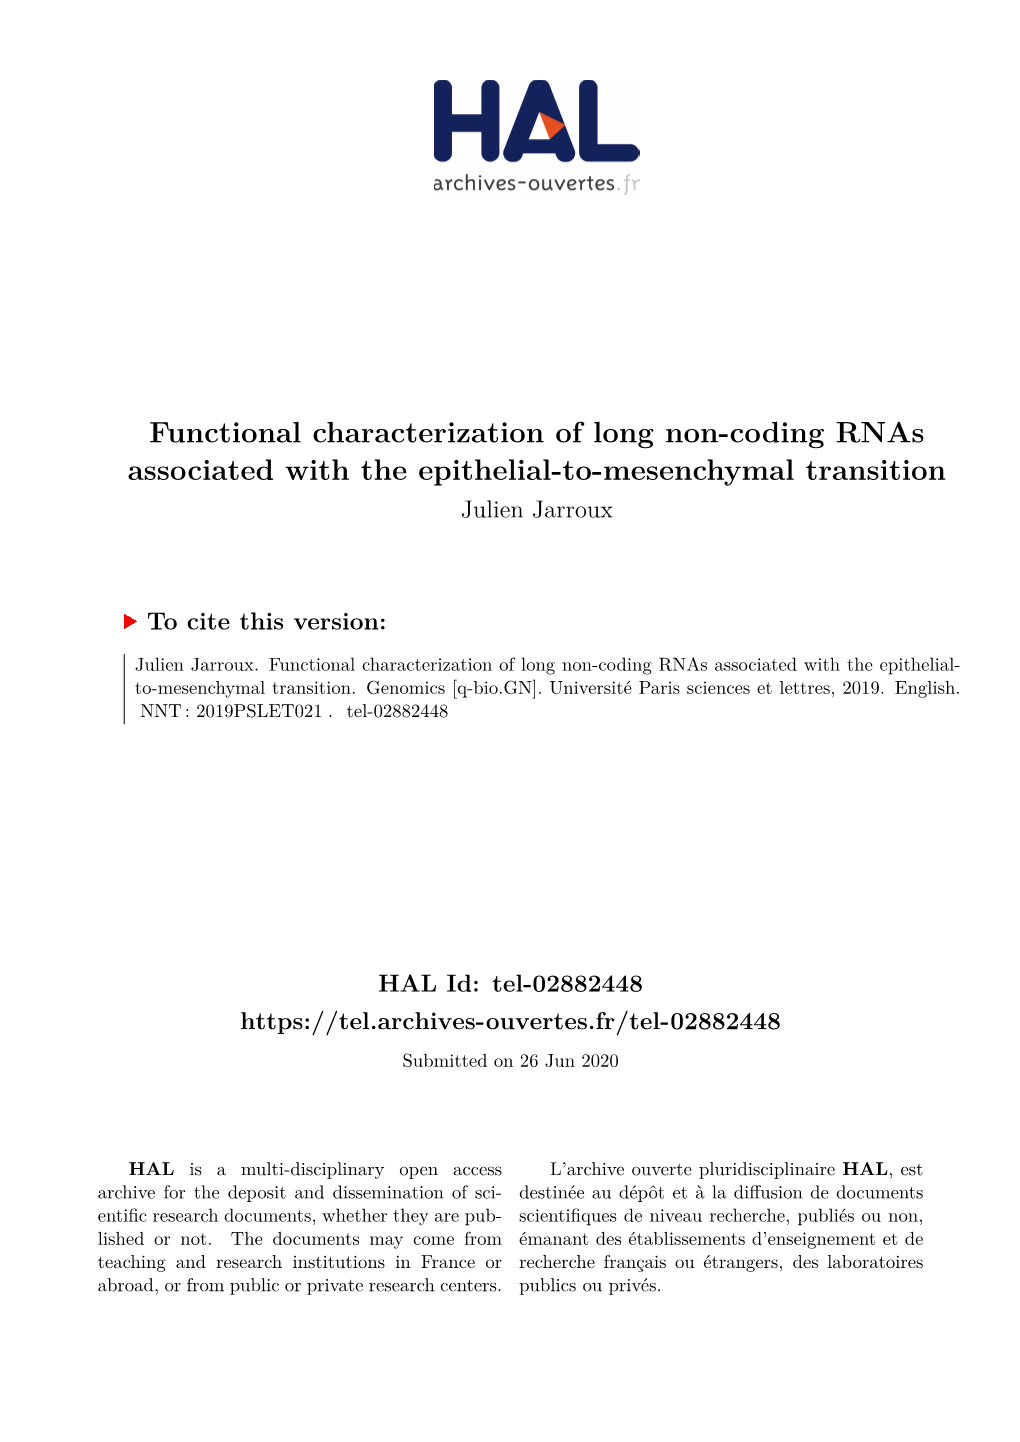 Functional Characterization of Long Non-Coding Rnas Associated with the Epithelial-To-Mesenchymal Transition Julien Jarroux